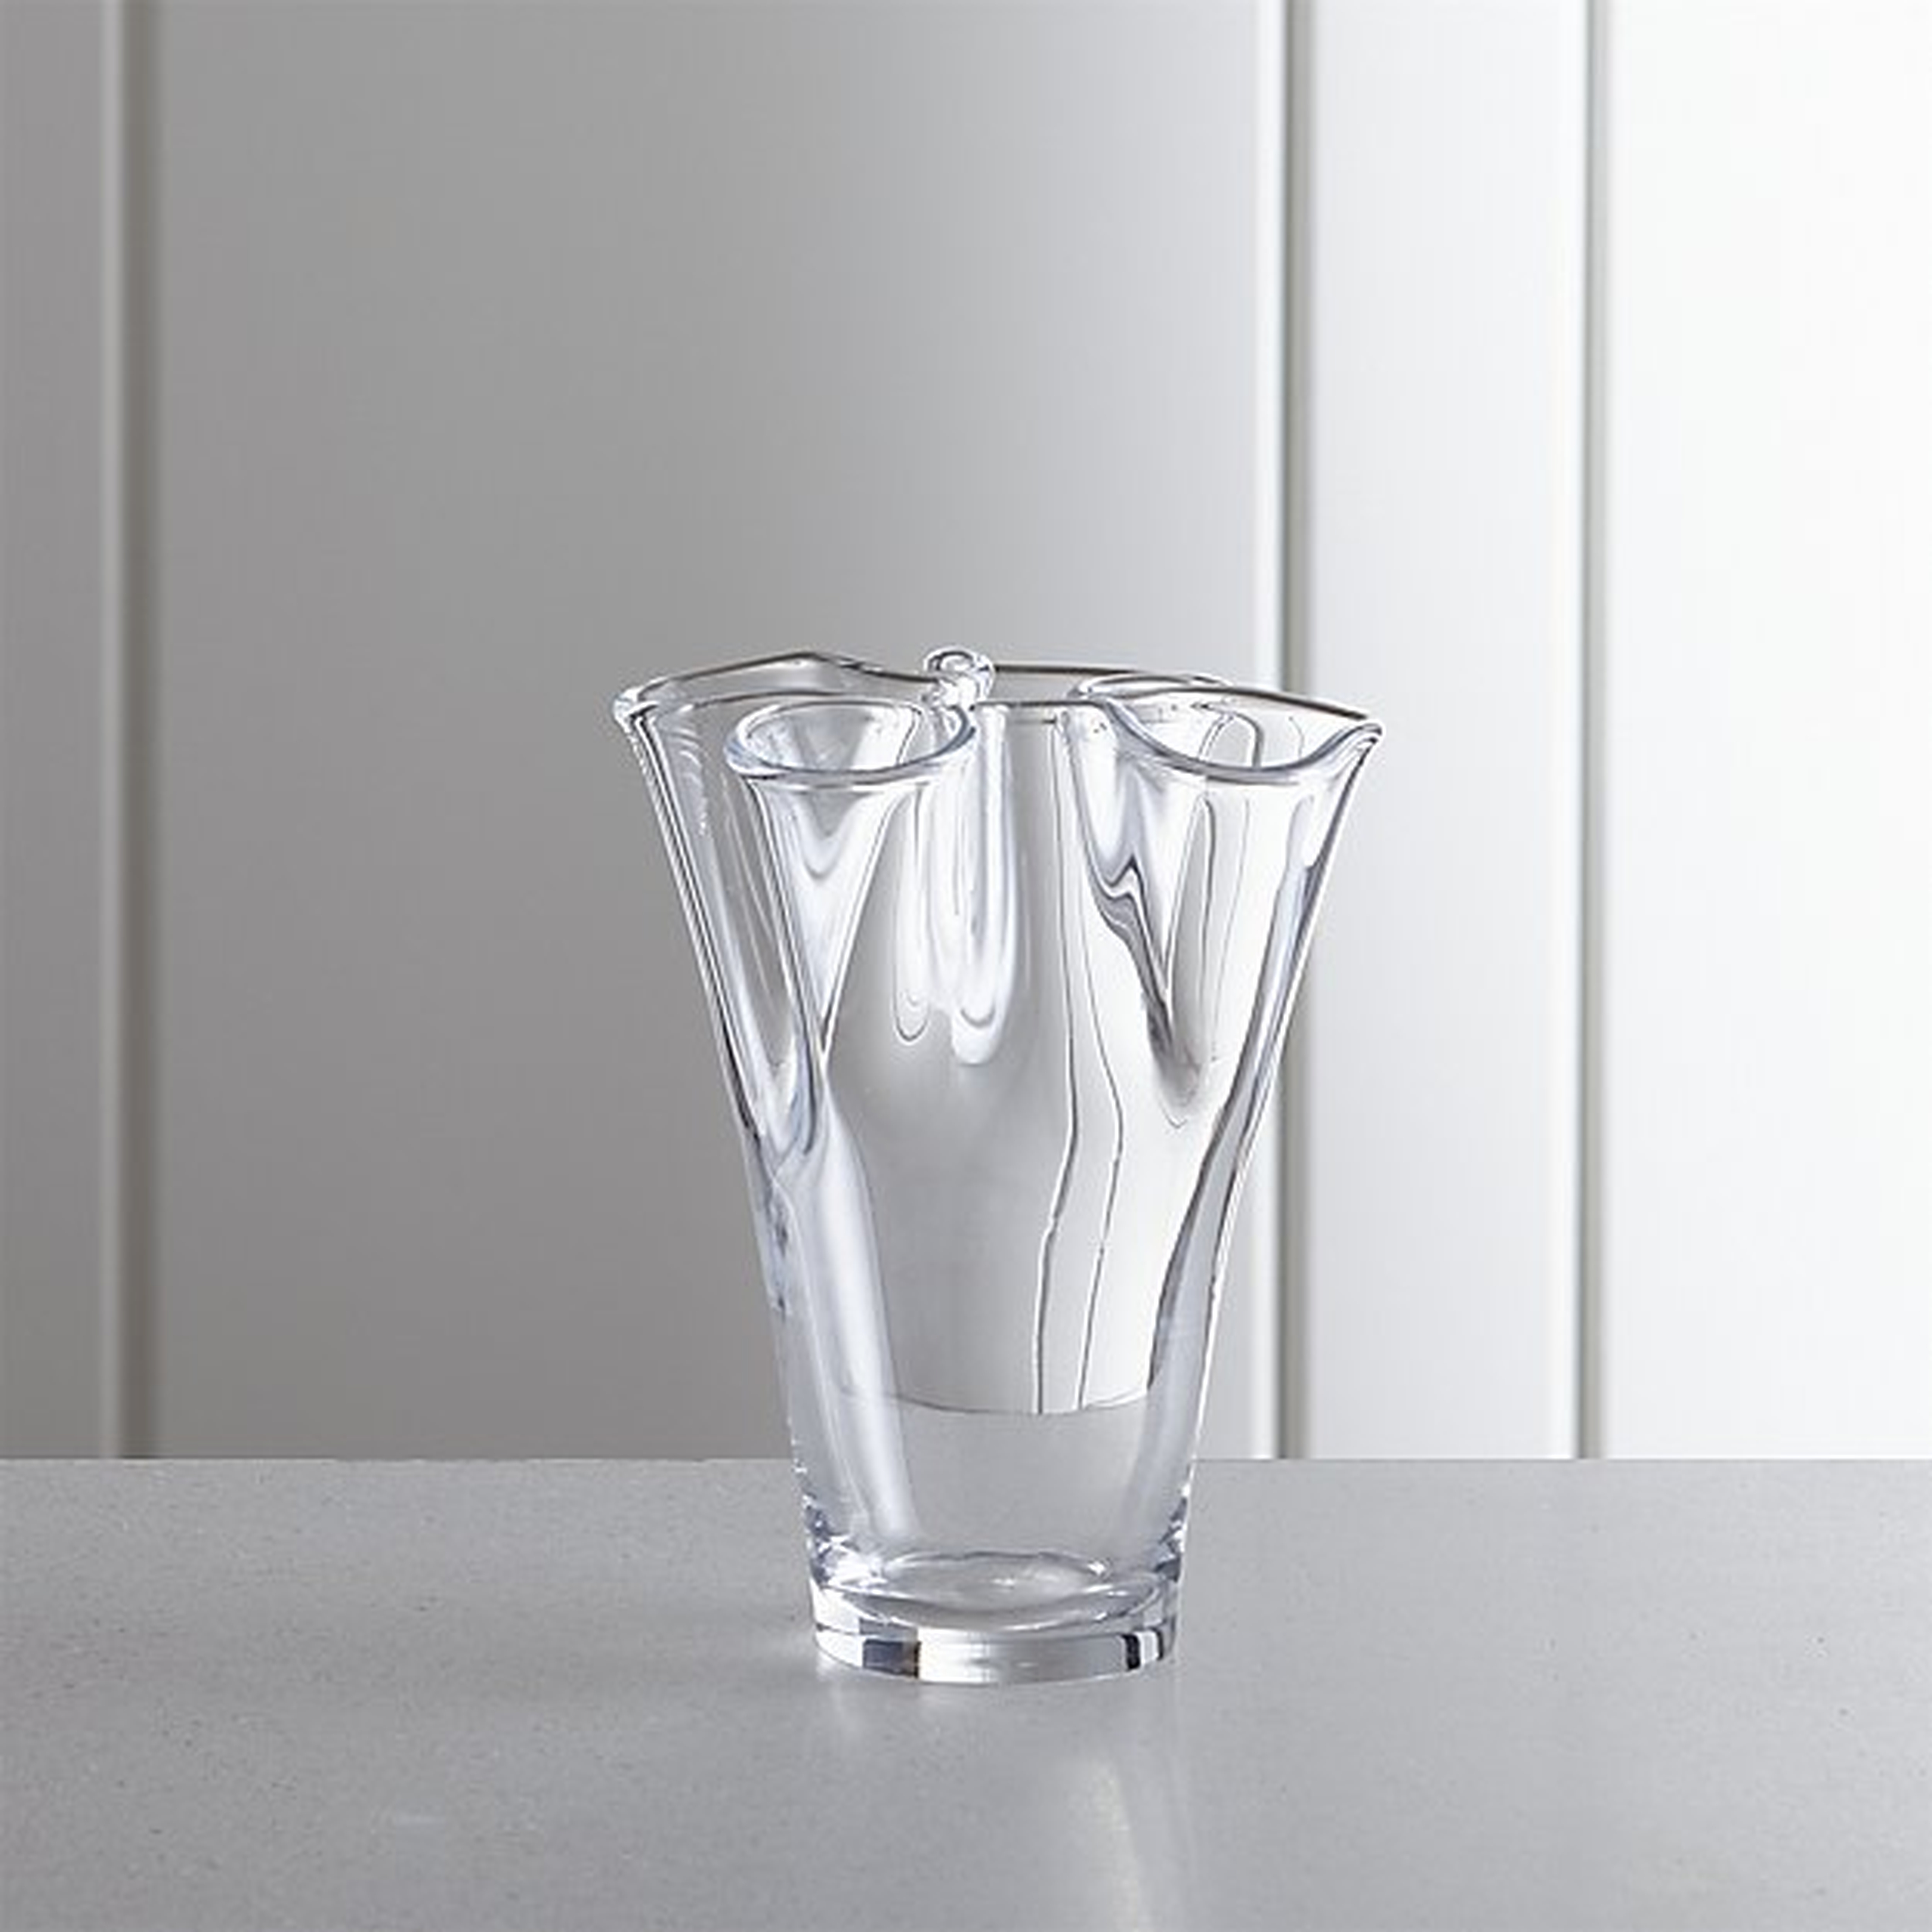 Evelyn Small Vase - Crate and Barrel